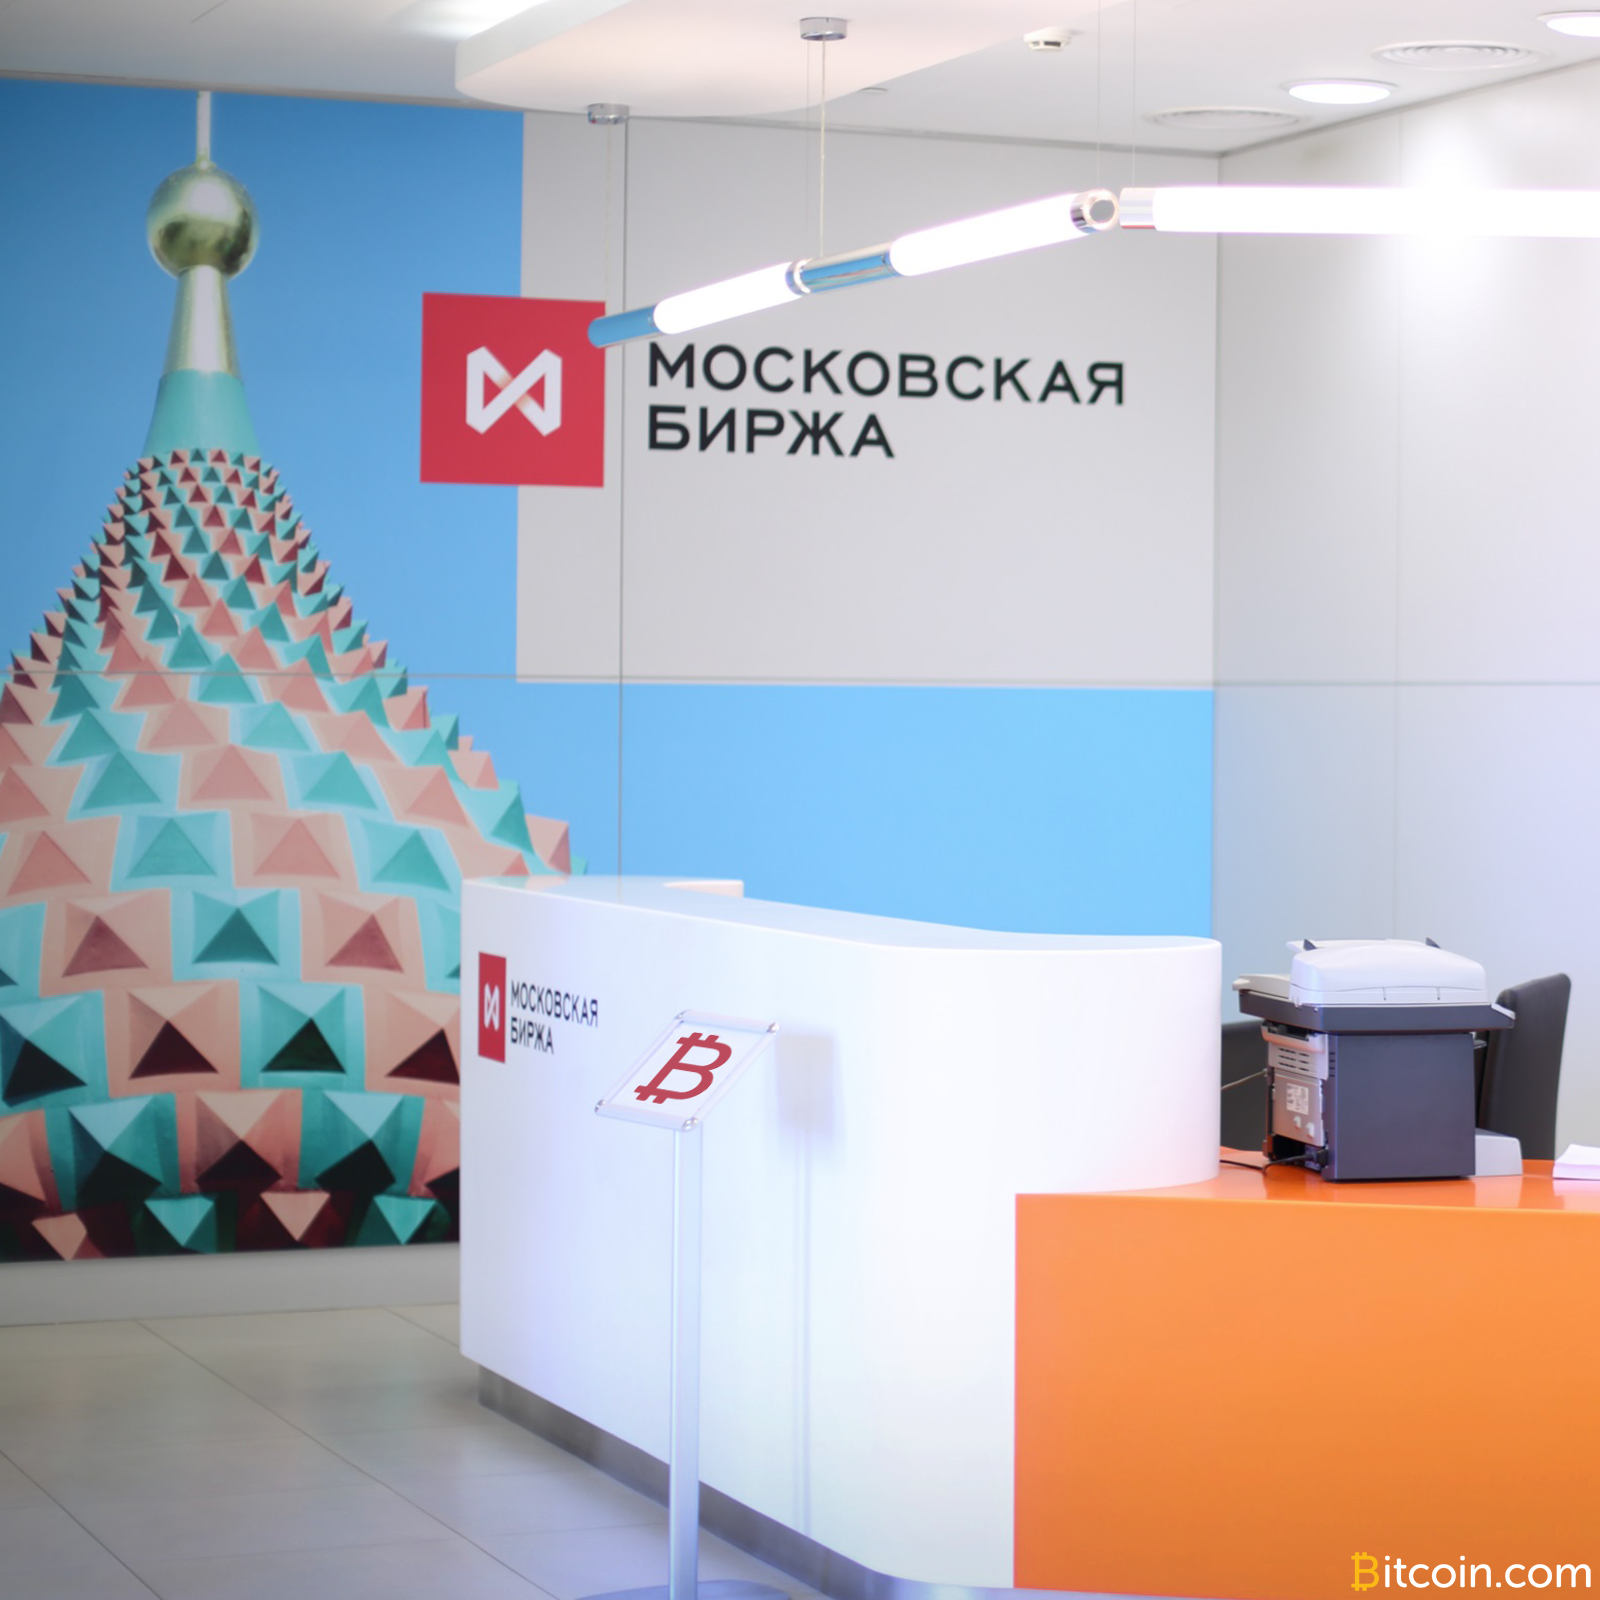 Moscow Exchange Clarifies Bitcoin Trading Plans After Conflicting Reports